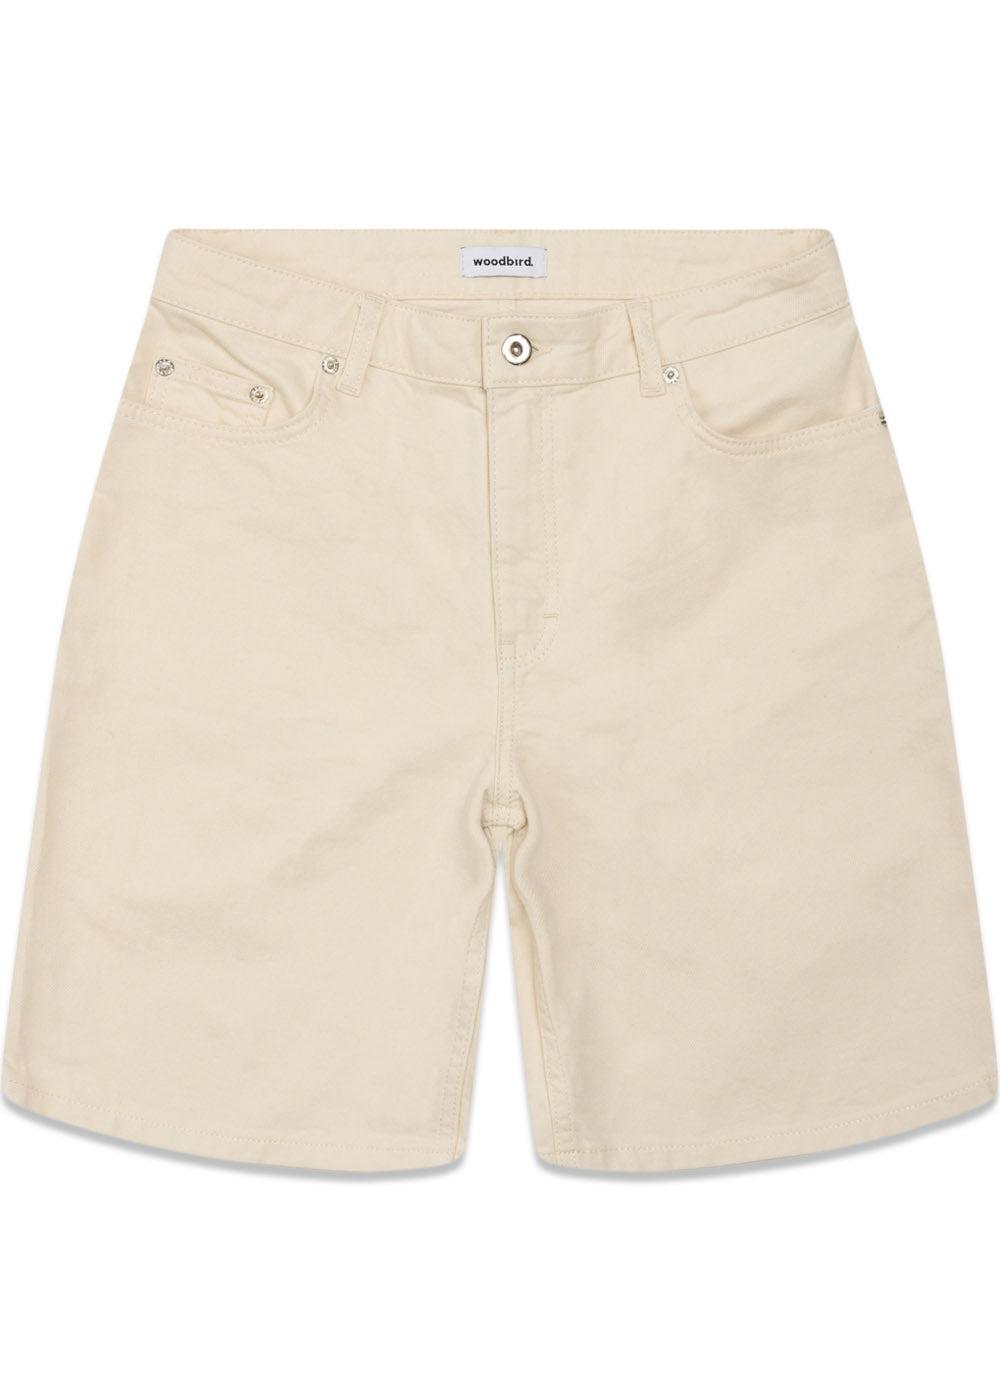 Maggie Twill Shorts - Off White